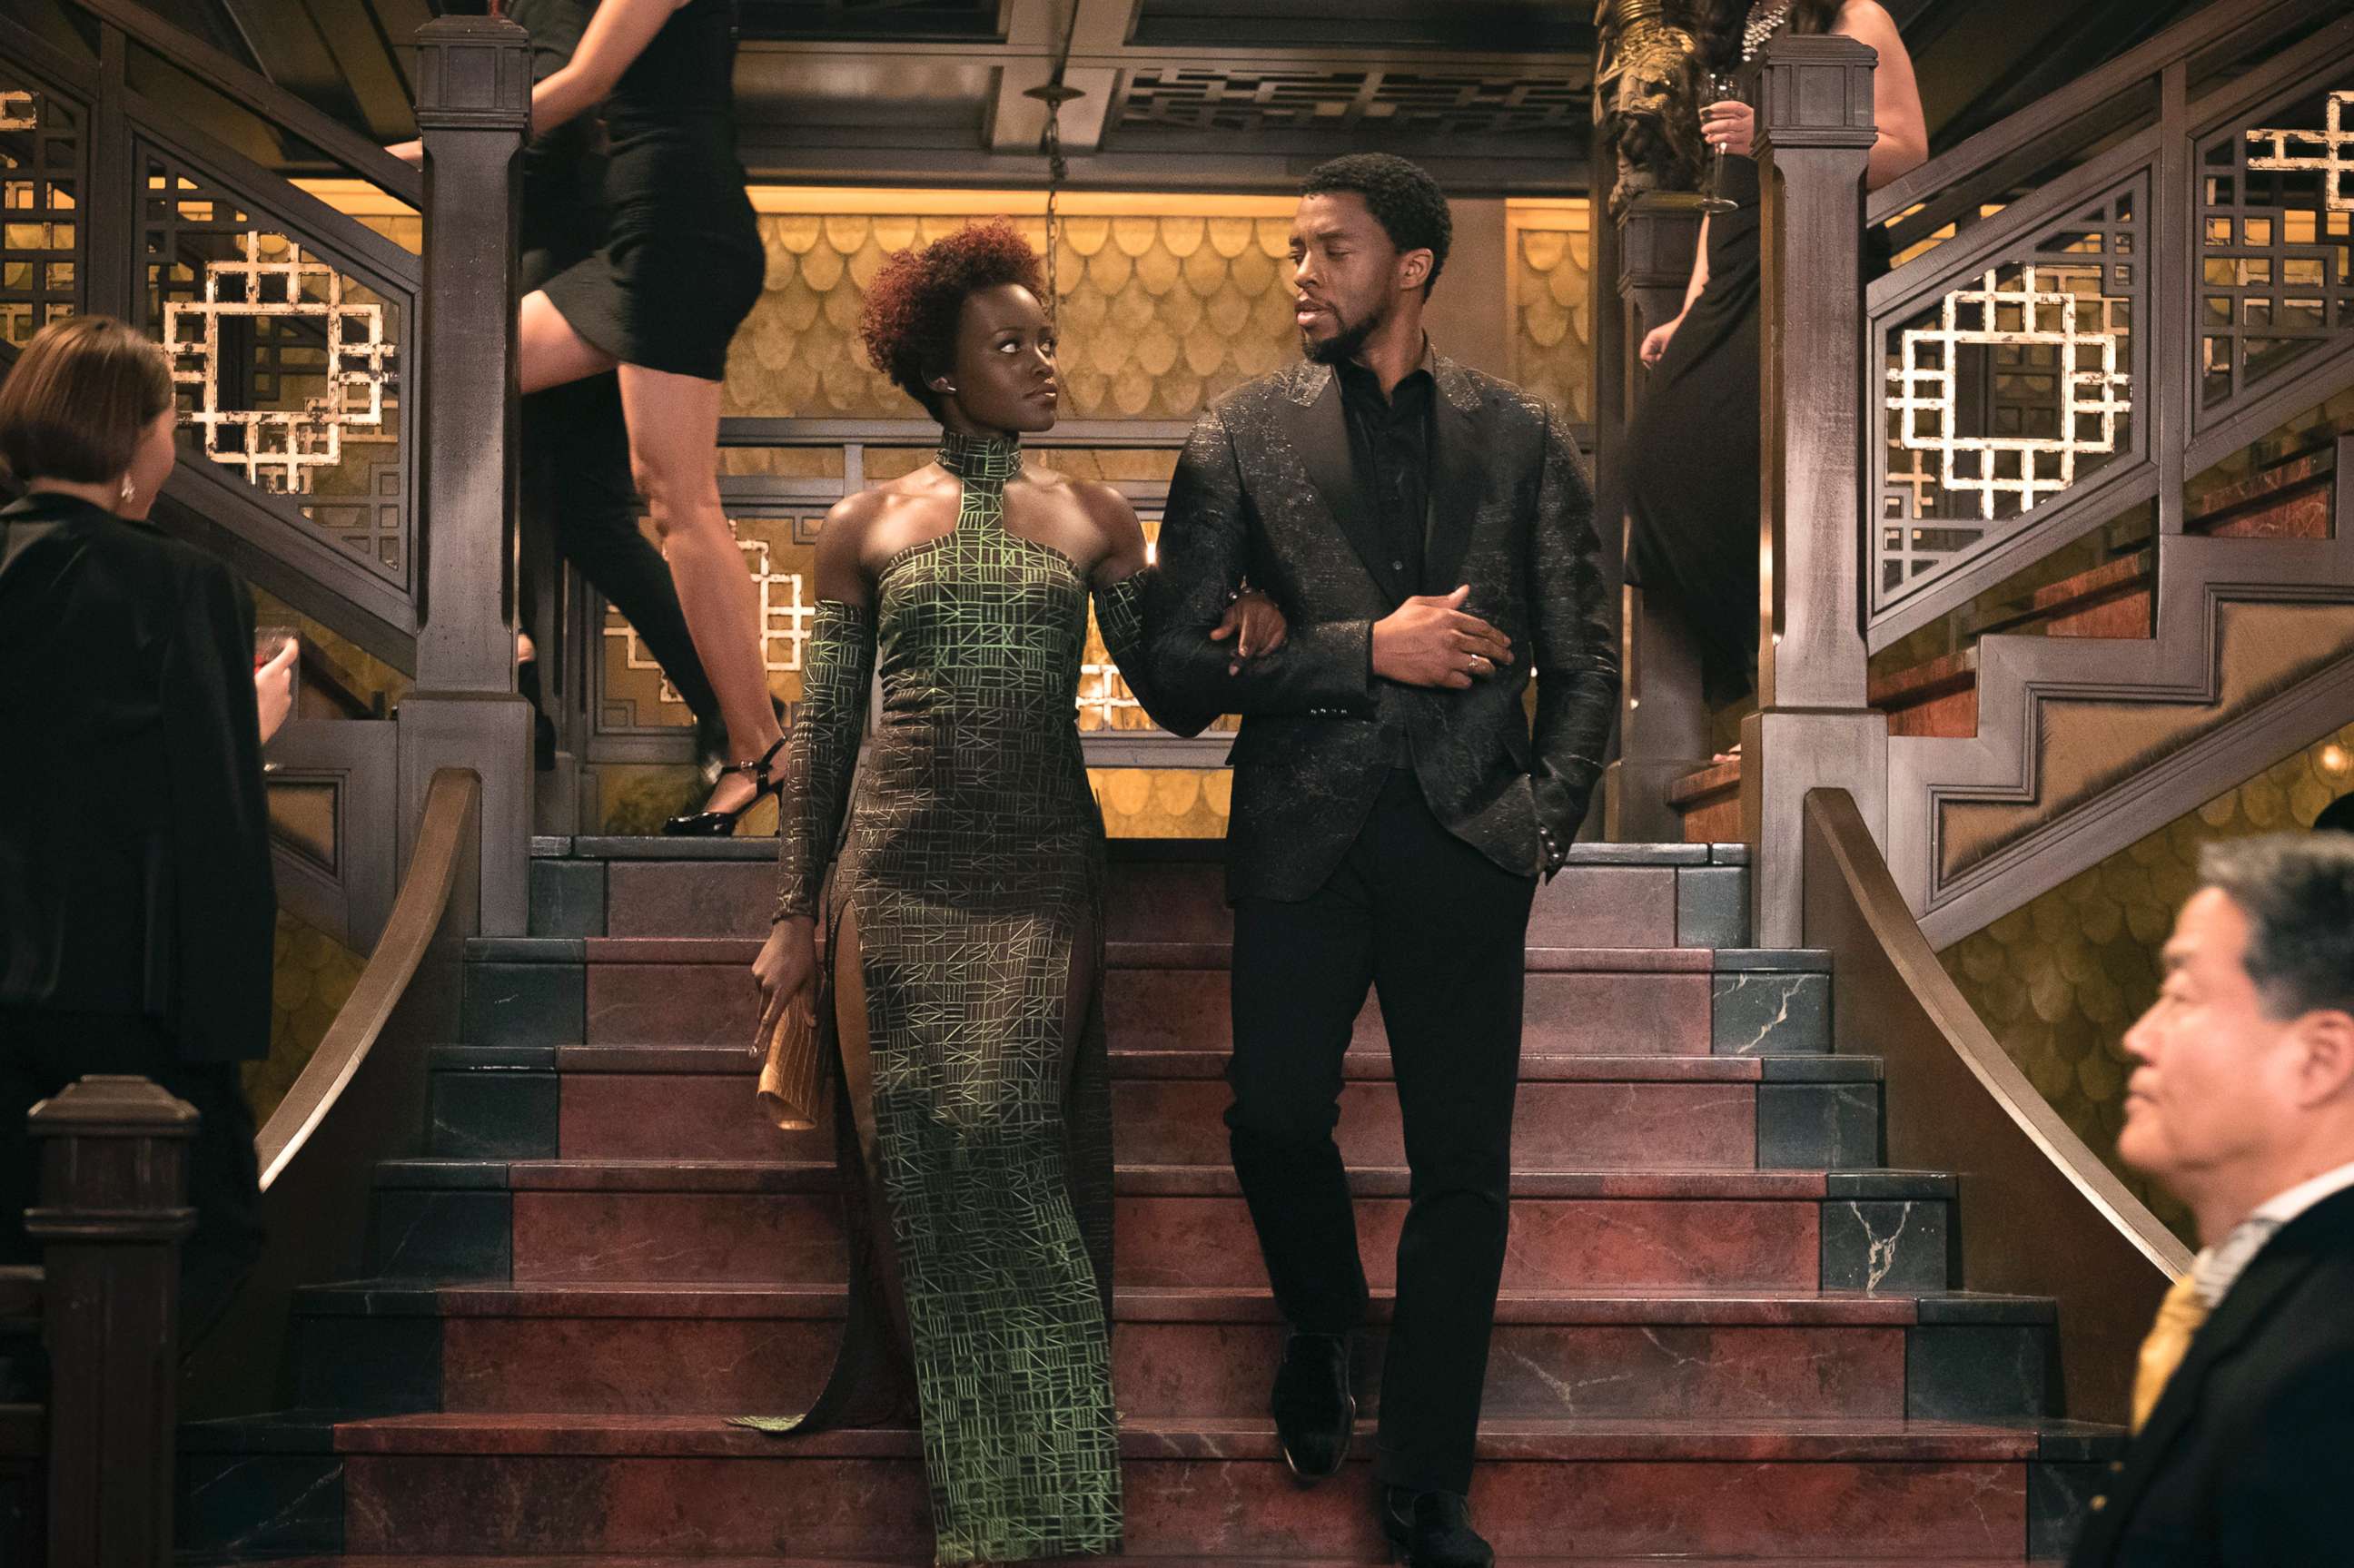 PHOTO: Lupita Nyong'o and Chadwick Boseman in a scene from the movie Black Panther.